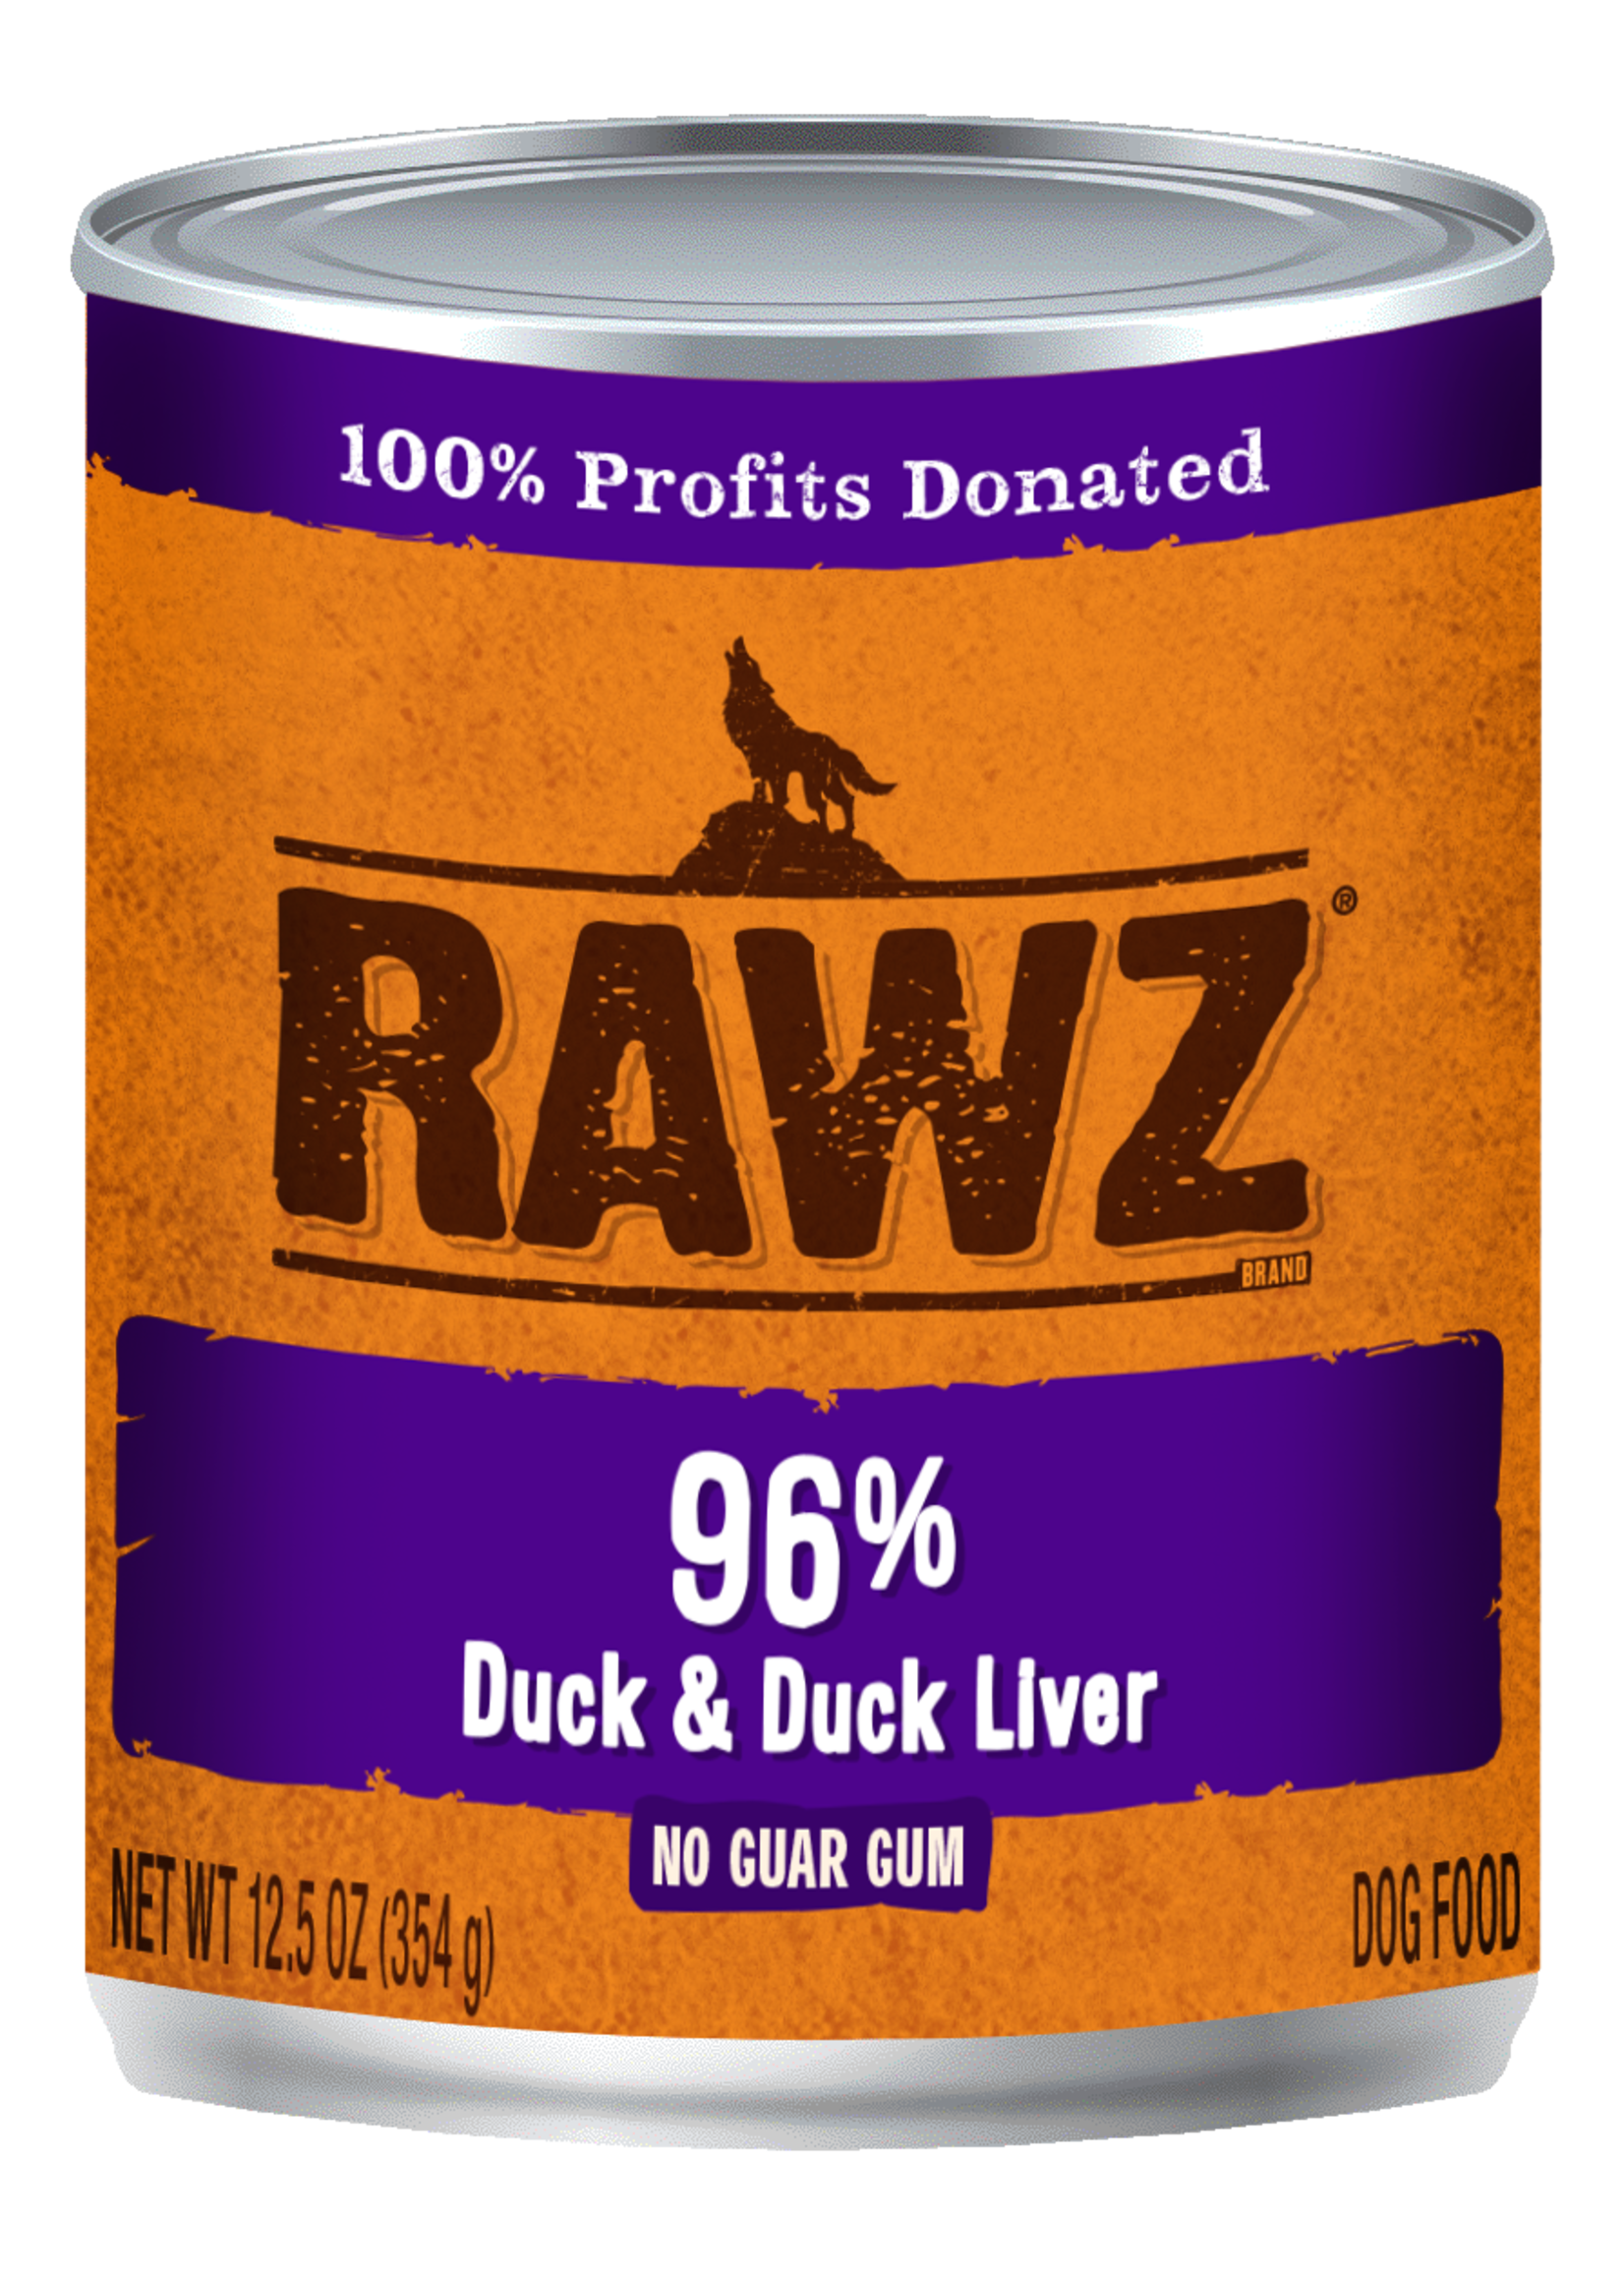 RAWZ Natural Pet Food 96% Duck & Duck Liver Canned Dog Food